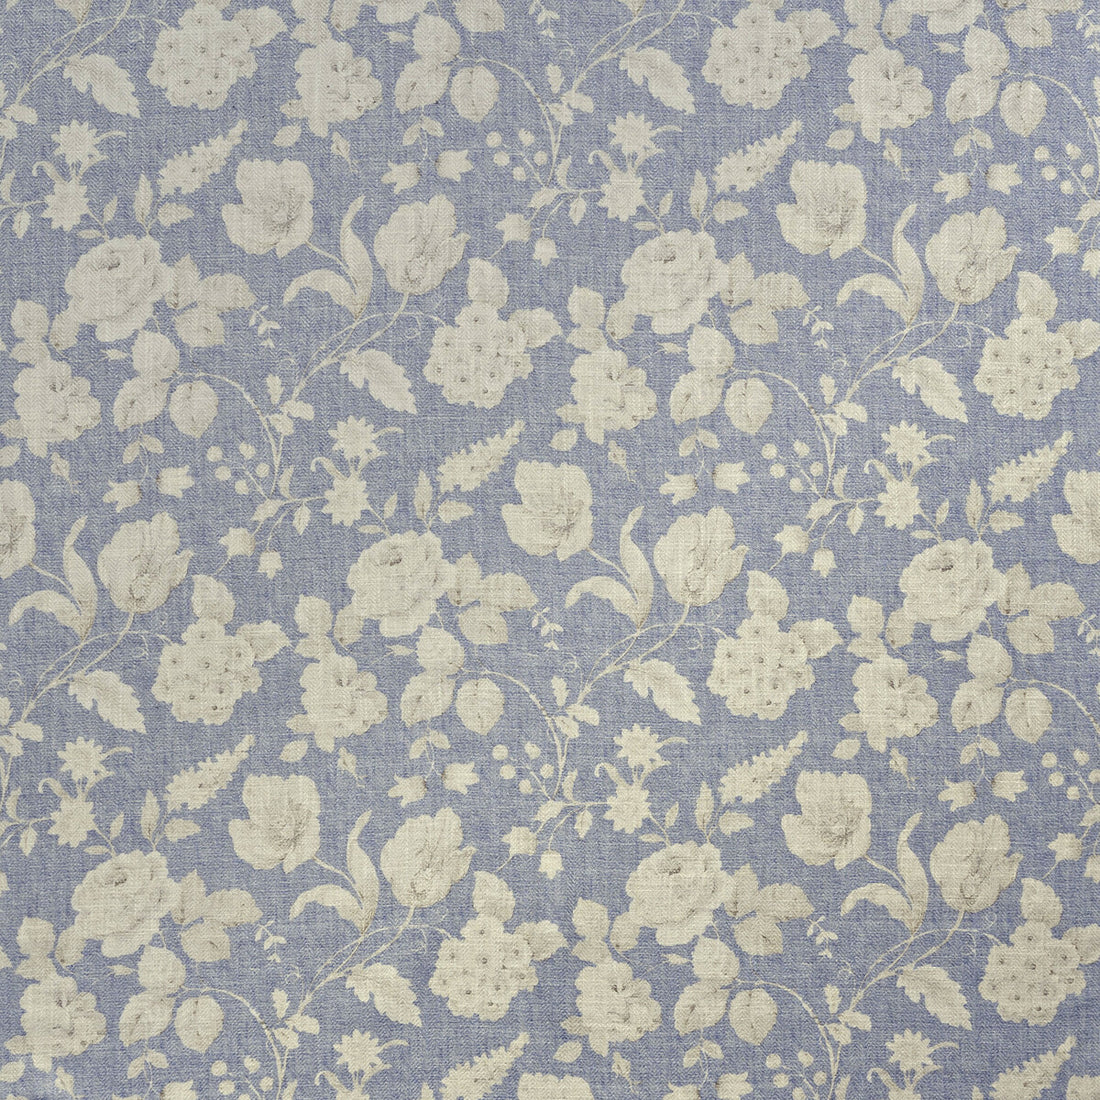 Narikala fabric in denim color - pattern AM100336.5.0 - by Kravet Couture in the Andrew Martin Hindukush collection